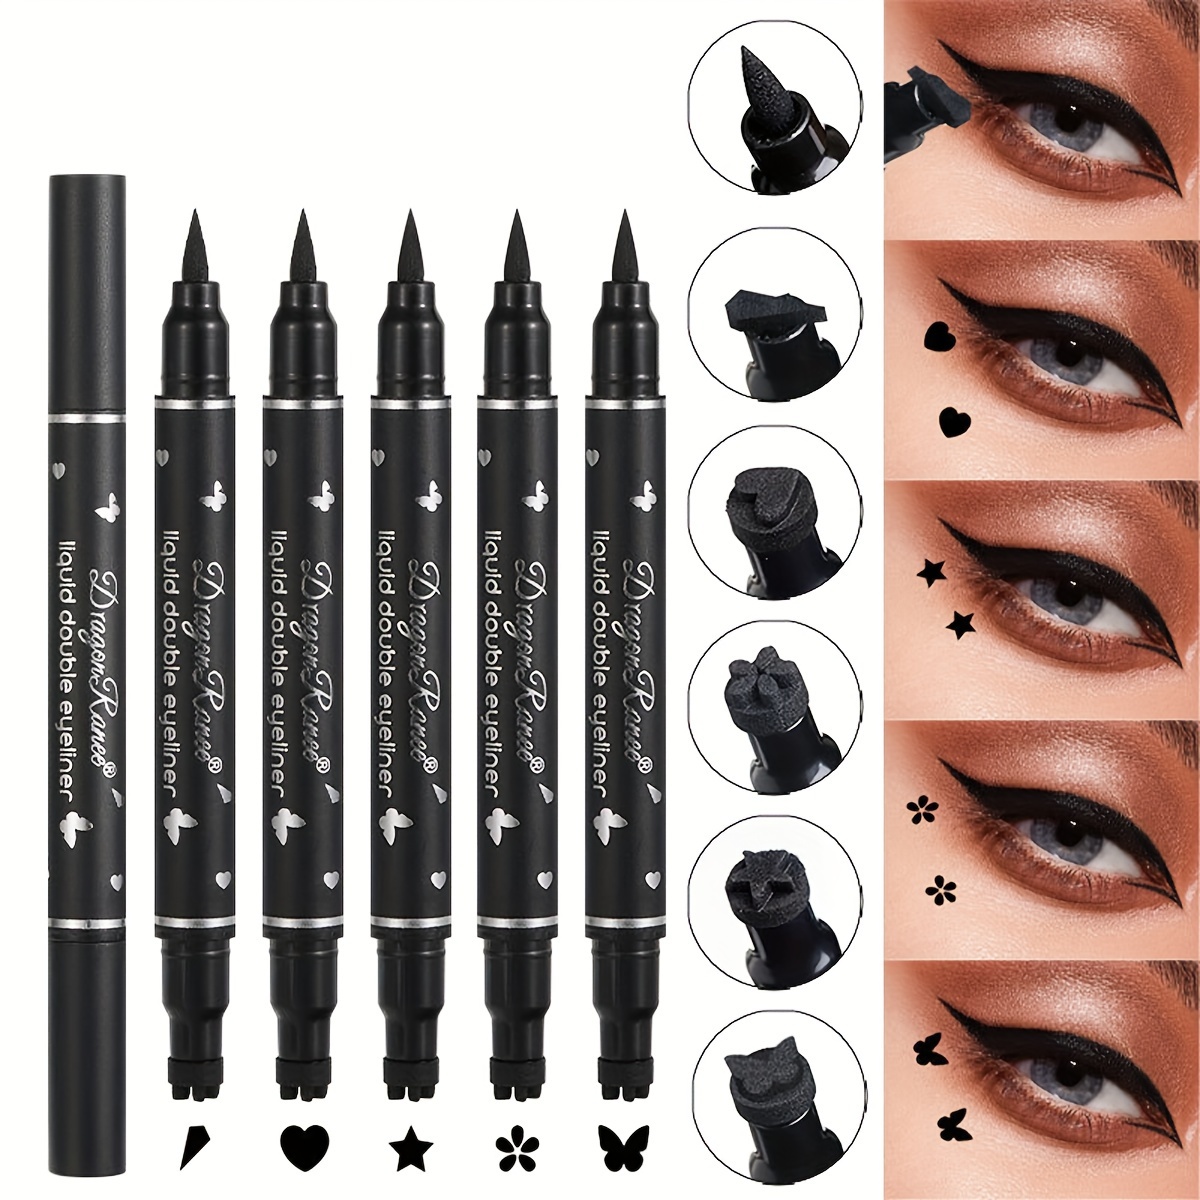 

5pcs Double-headed Stamp Eyeliner, Waterproof Non-smudged, Love Plum Blossom Star Decorations For Eye Corner, Suitable For Festival Party Stage Makeup